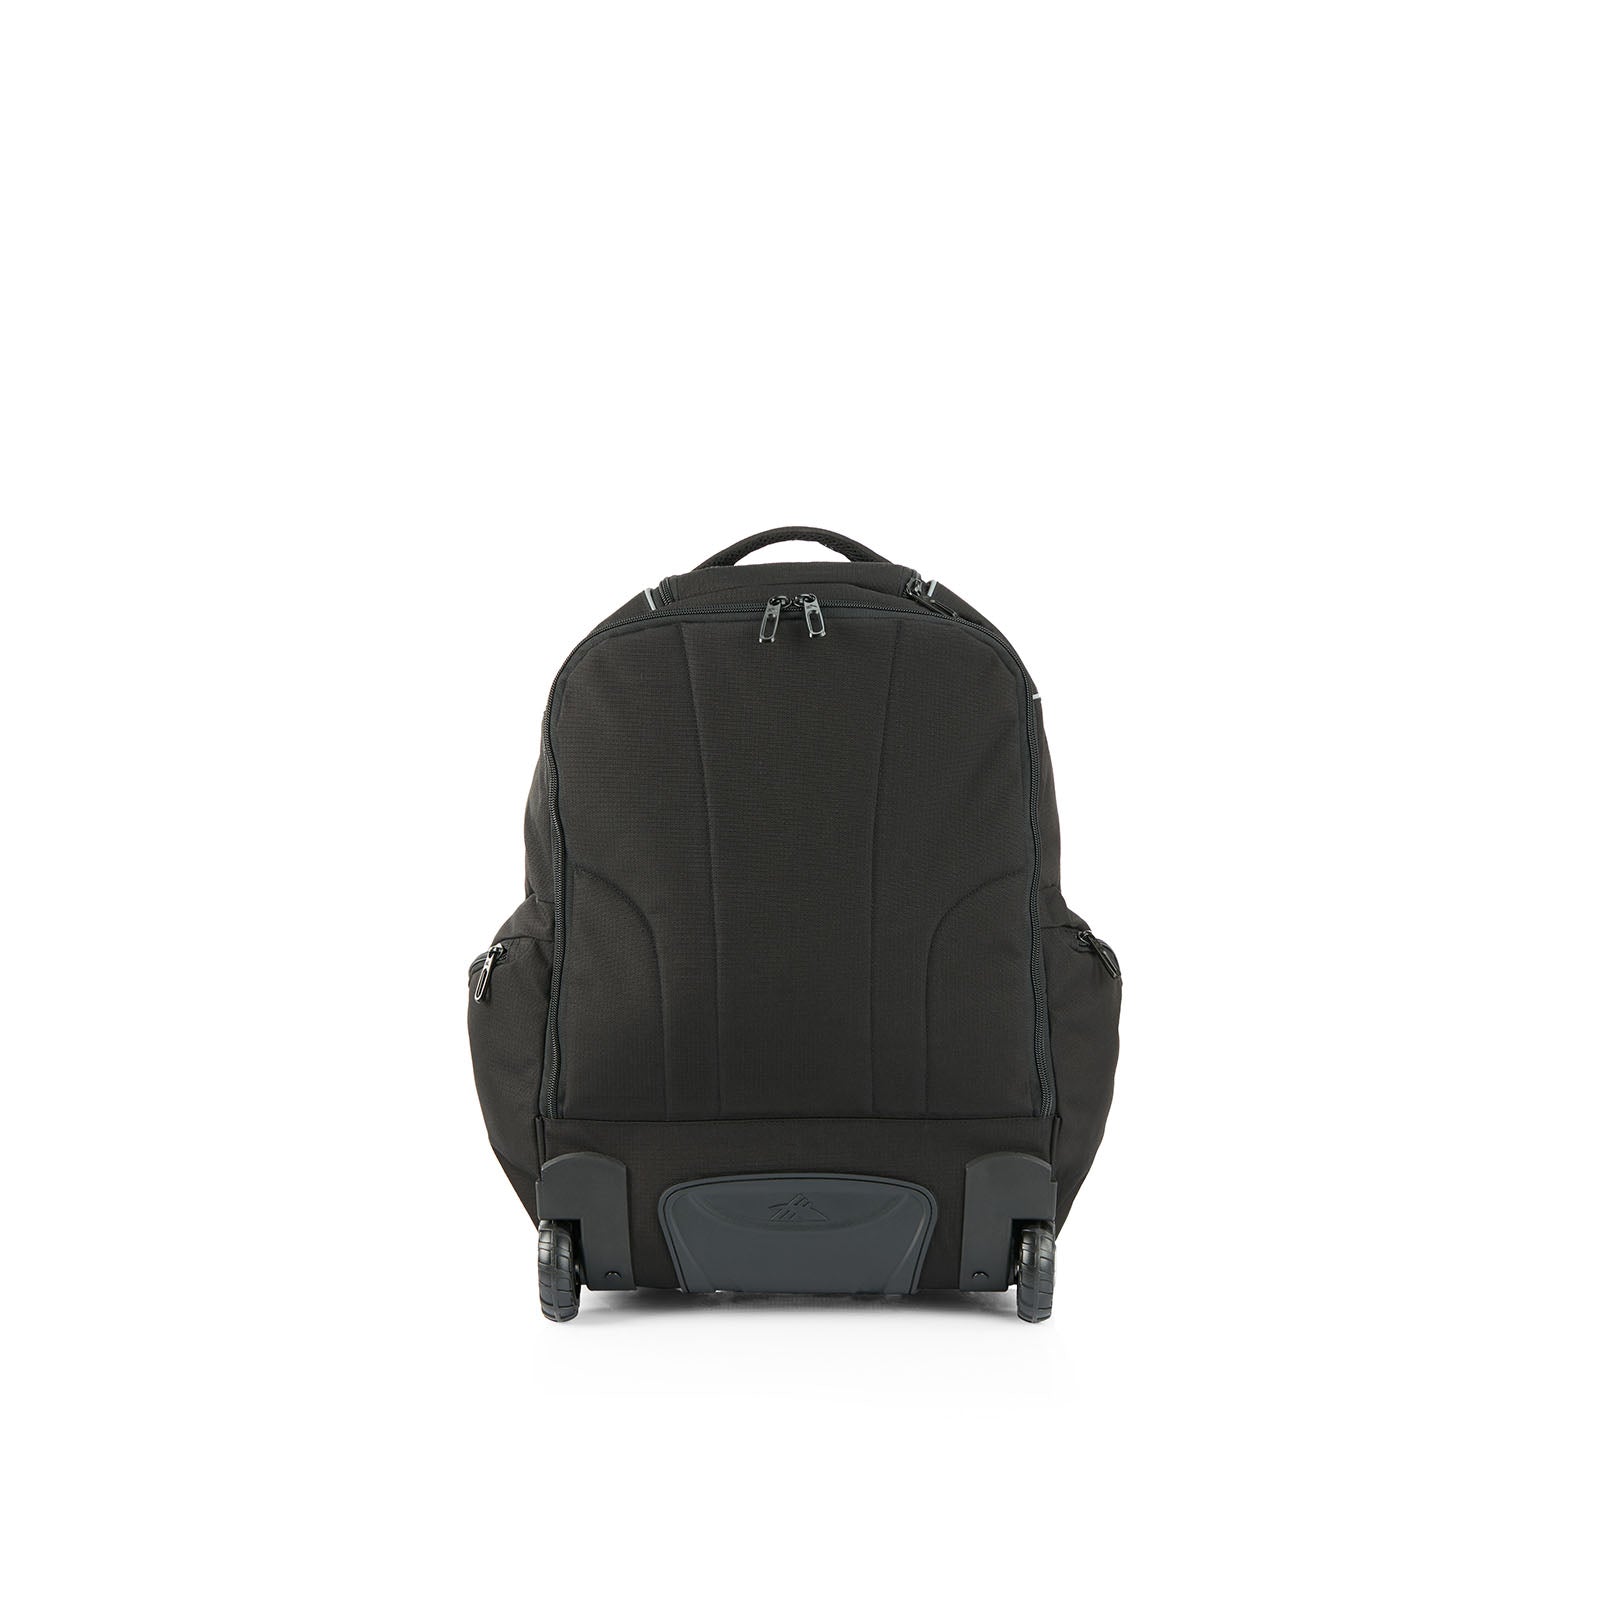 High-Sierra-Access-3-Eco-Pro-16-Inch-Wheeled-Laptop-Backpack-Black-Back